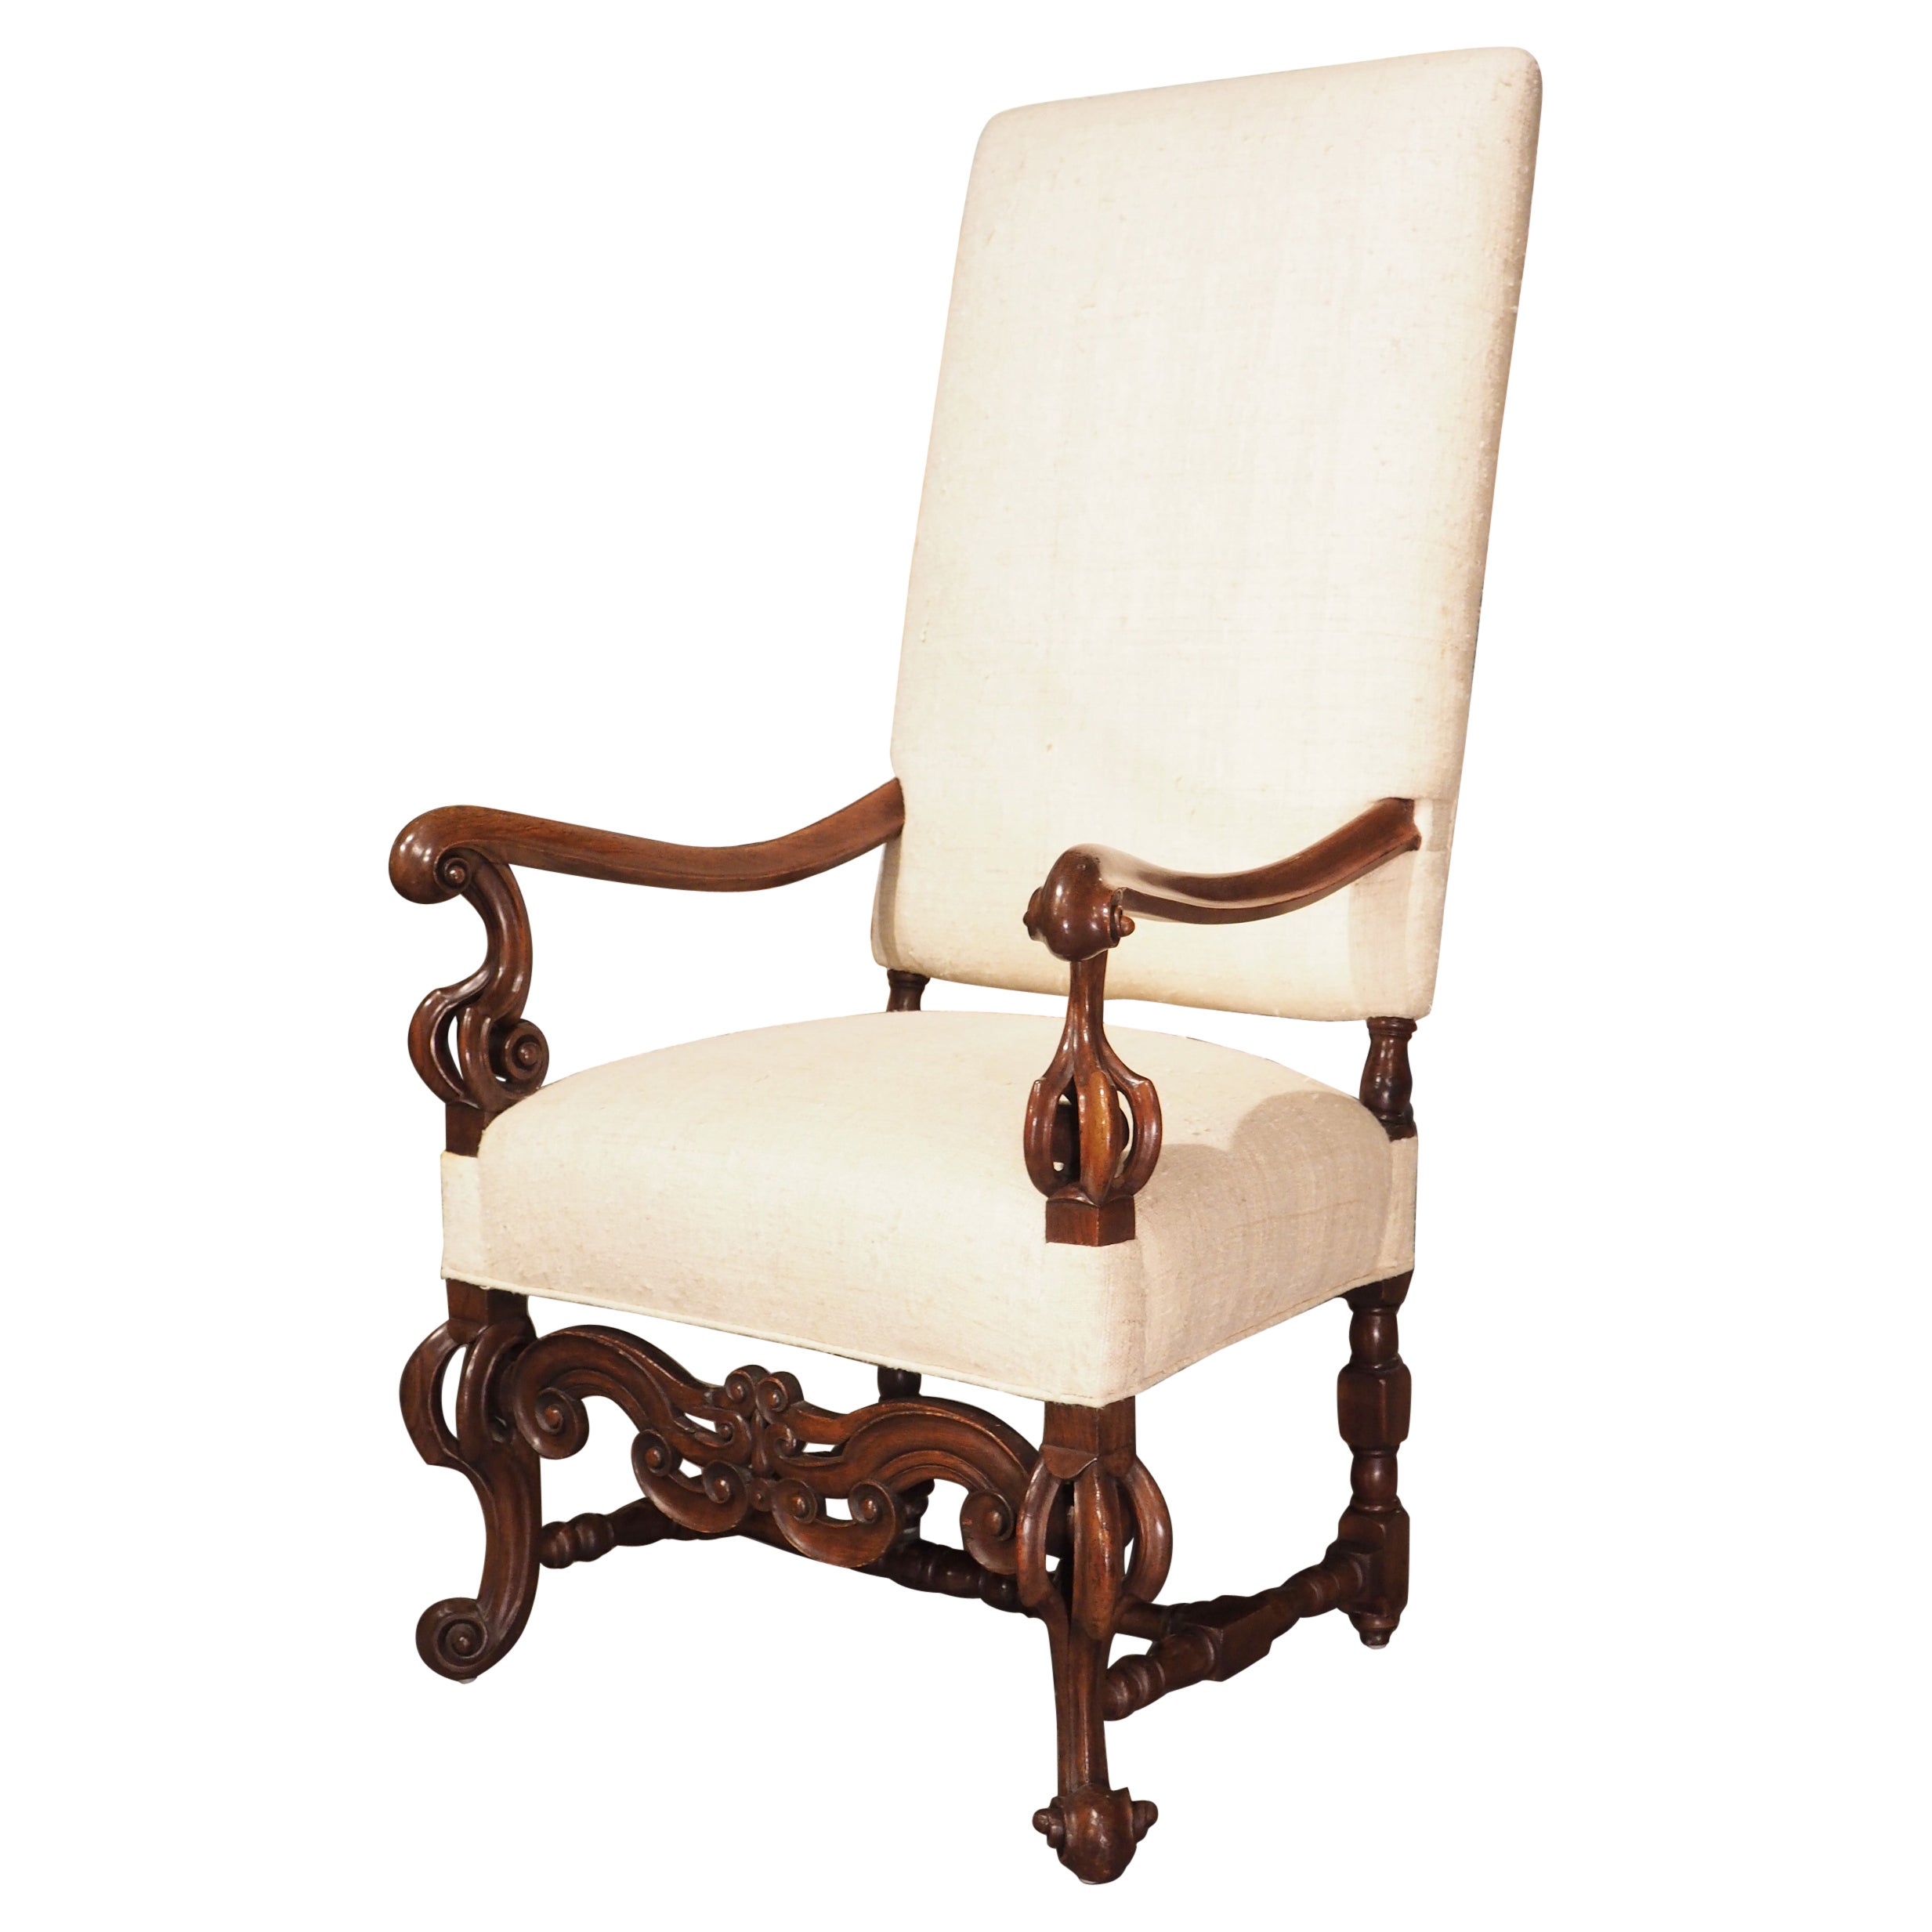 Antique Italian Walnut Wood Armchair with Raw Silk Upholstery, circa 1890 For Sale